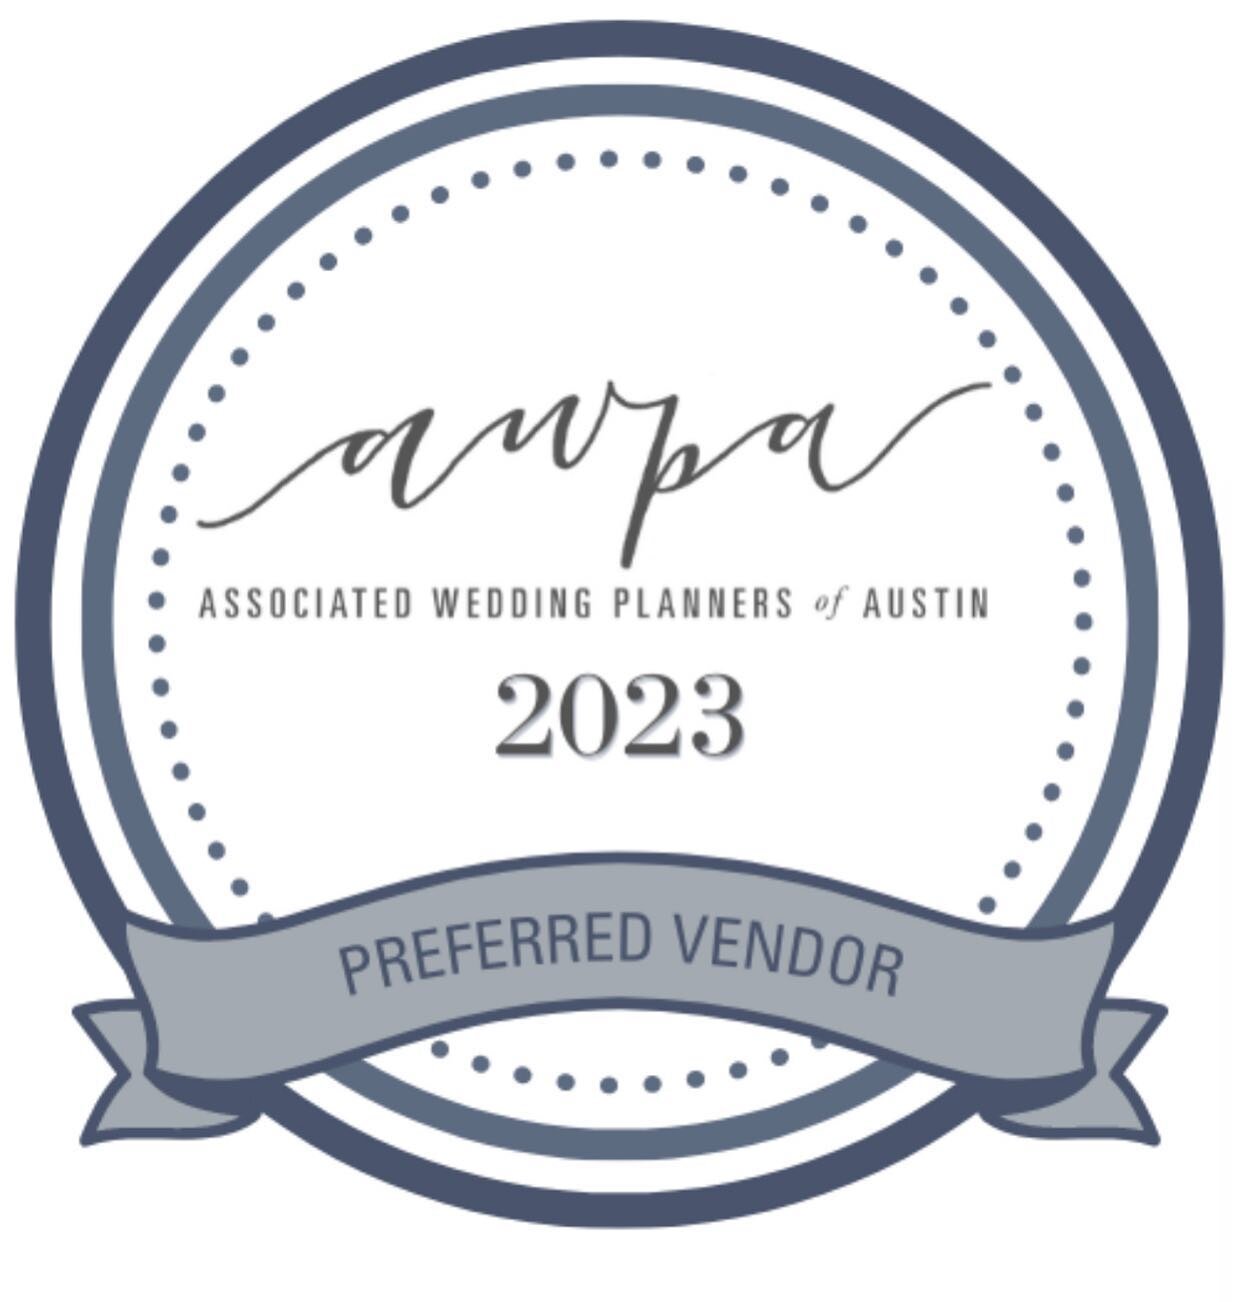 Very happy and excited to be a preferred vendor with Associated Wedding Planners of Austin! #austin #wedding #weddingseason